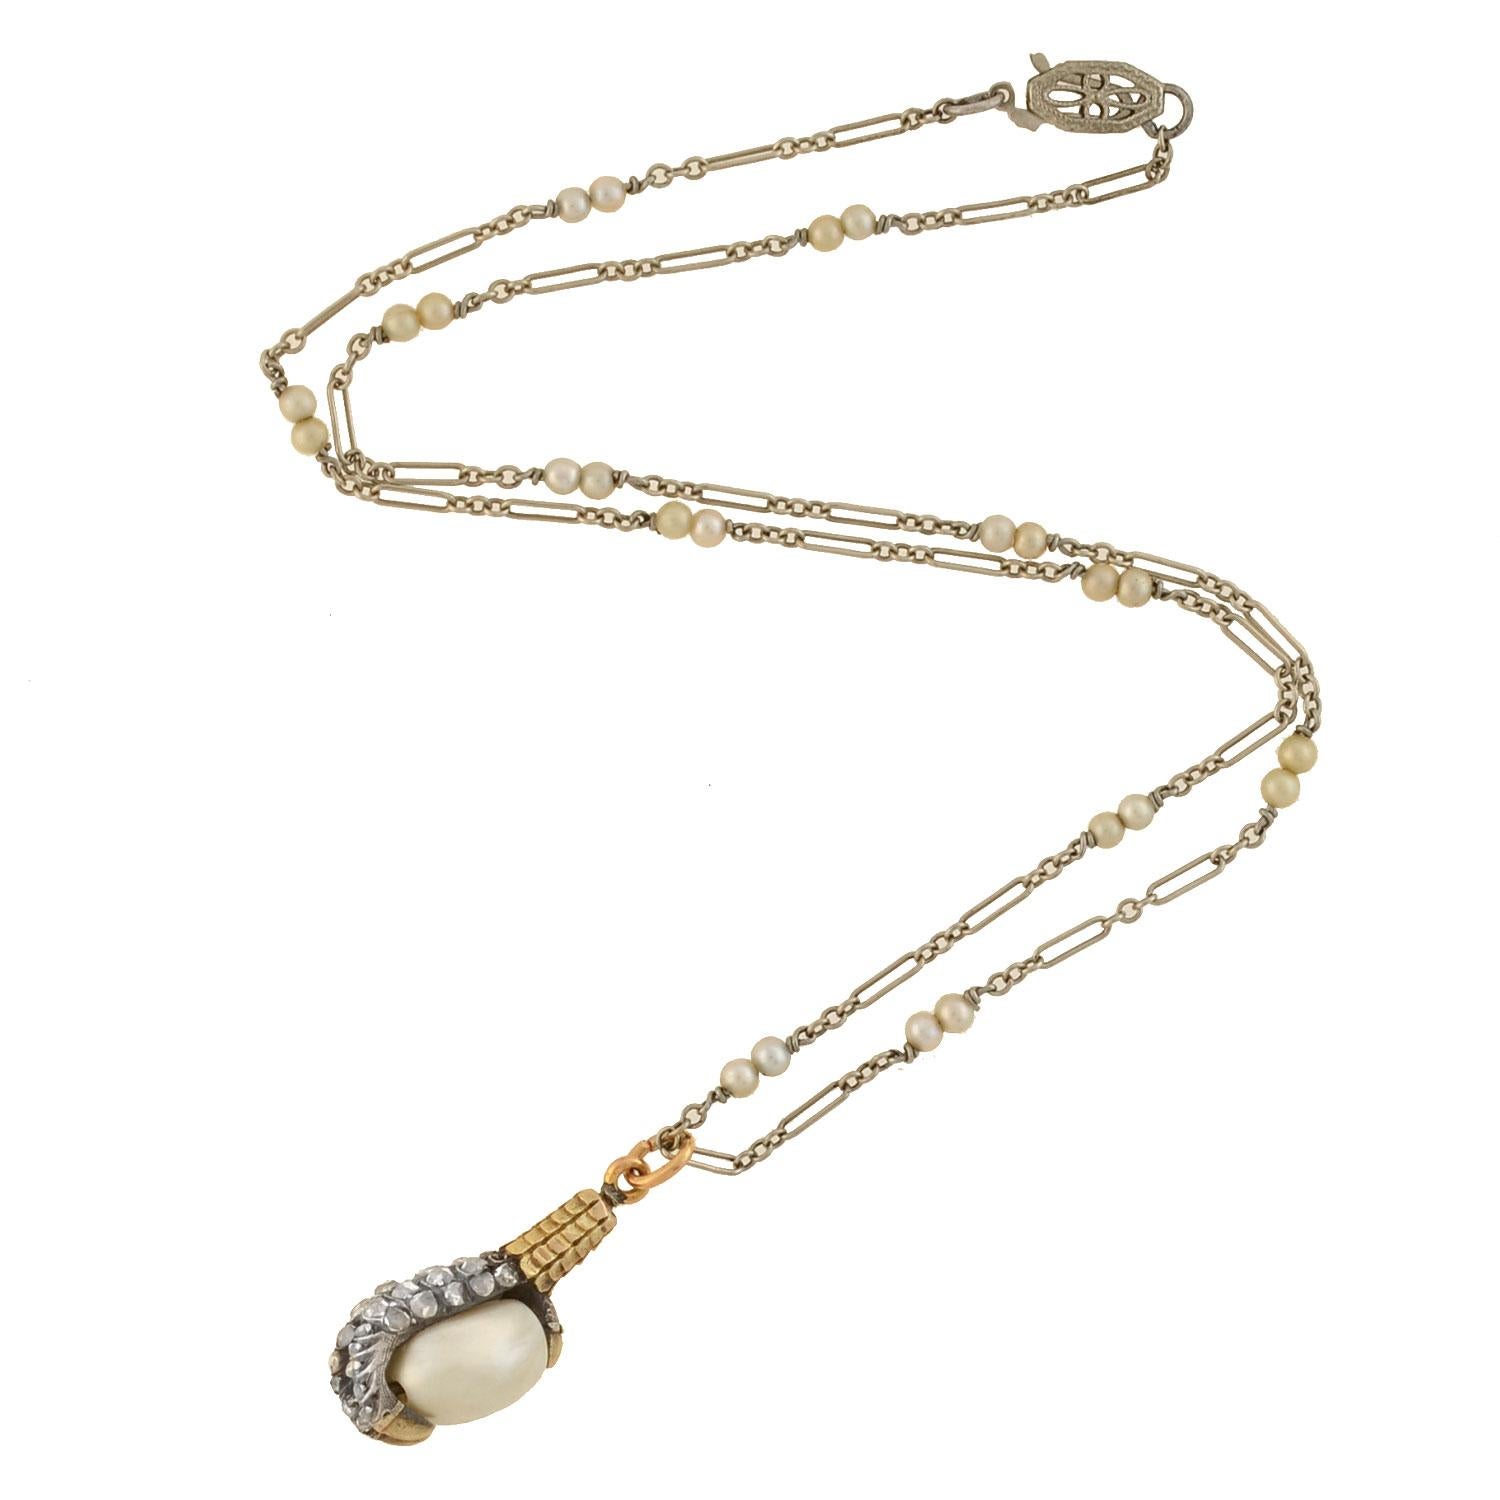 An absolutely stunning pearl claw pendant necklace from the Victorian (ca1880) era! This incredible piece is comprised of an intricate mixed metals diamond and pearl pendant which hangs from a complimentary chain. The pendant is crafted in 18kt gold